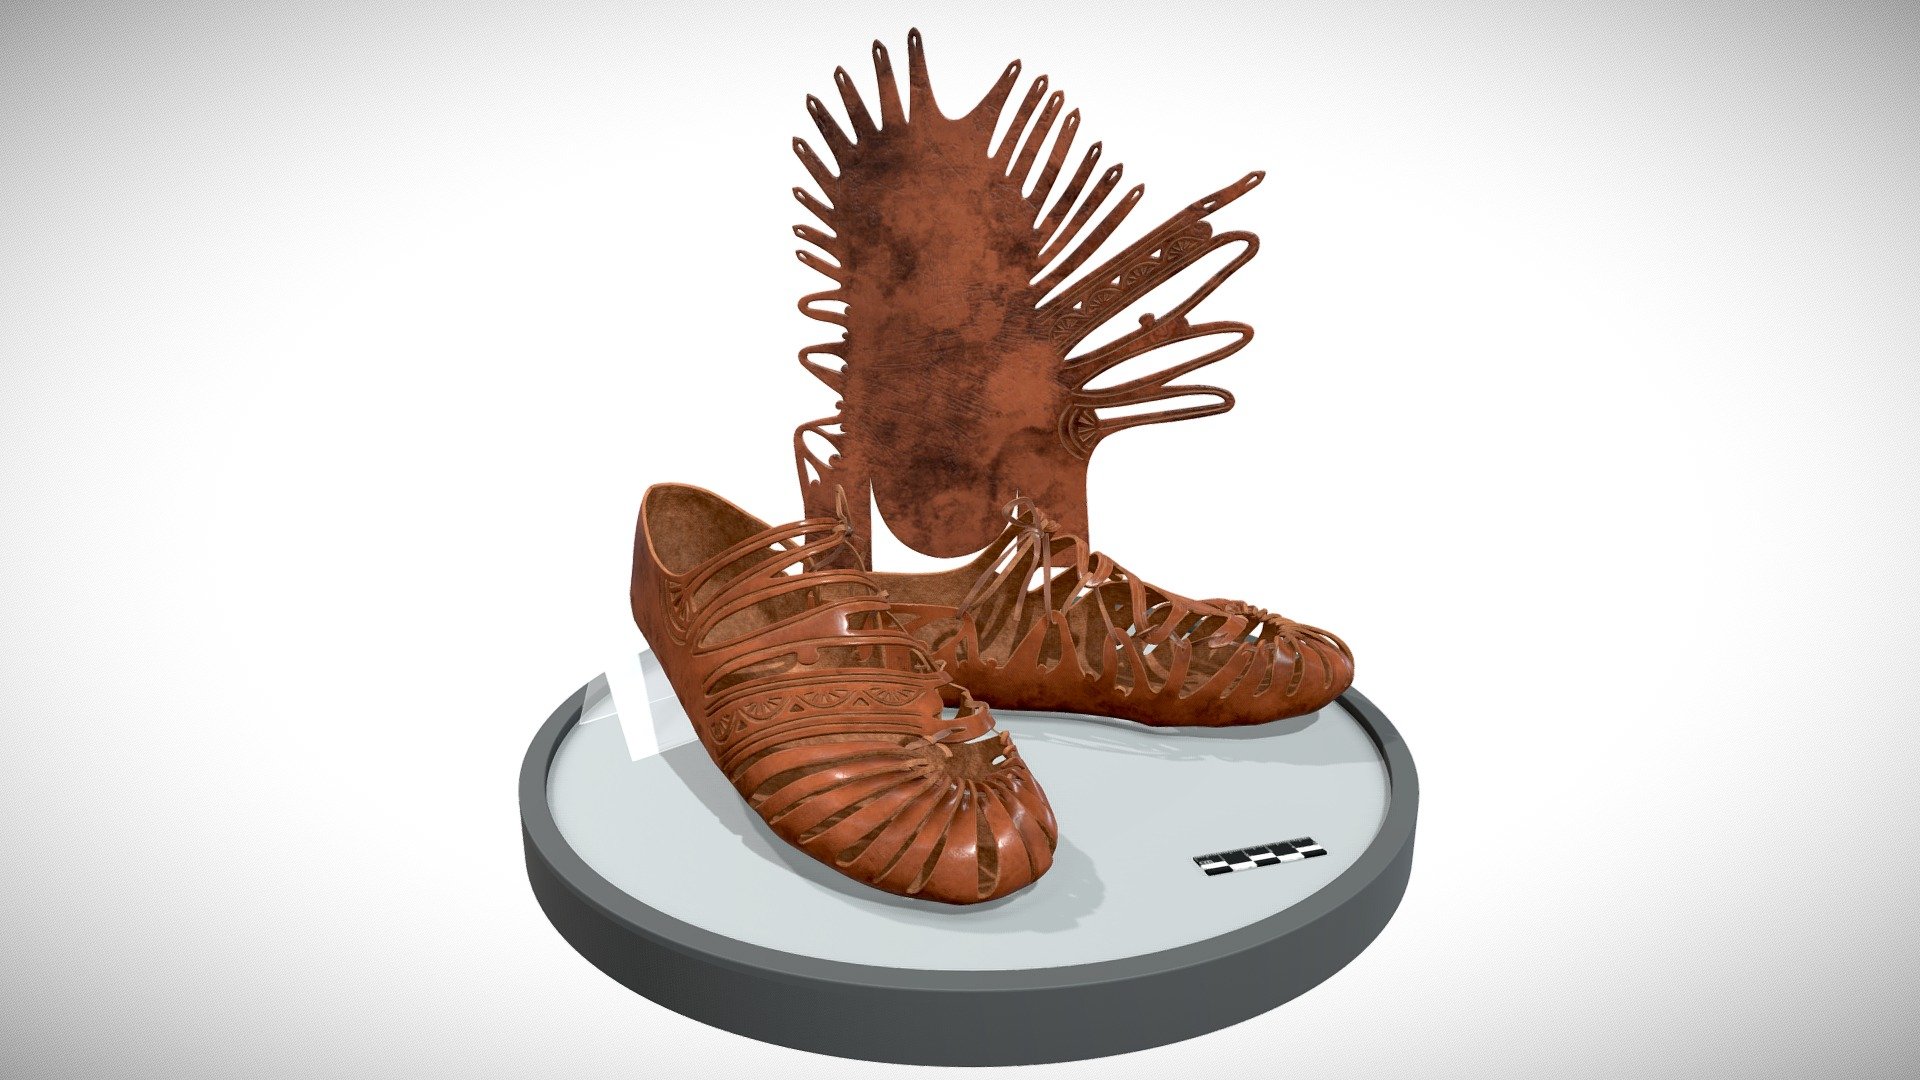 The 3D model presents a digital reconstruction of a pair of shoes dating to the 3rd century AD. The reconstructed shoes were found on the feet of a male bog body at Obenaltendorf in Germany. The shoes are of a carbatina type, meaning that they are made from one piece of leather. This piece is sewn shut at the back to form a heel. The shoes are worn by inserting a lace through the tabs that can be tightened and closed. The reconstruction was made by using original cutting pattern provided by Martin Moser (https://www.pinterest.ru/martinmoser/). The piece of hide was wrapped around the foot in Clo3D software, textured in Substance Painter and post-processed in 3dsMax.

The authors are
Martijn A. Wijnhoven https://vu-nl.academia.edu/MartijnAWijnhoven

(VU University Amsterdam)

Aleksei Moskvin https://independent.academia.edu/AlekseiMoskvin

and

Mariia Moskvina https://independent.academia.edu/MariiaMoskvina

(Saint Petersburg State University of Industrial Technologies and Design) - Obenaltendorf shoes - a digital reconstruction - Download Free 3D model by Martijn A. Wijnhoven (@Martijn-A-Wijnhoven) 3d model